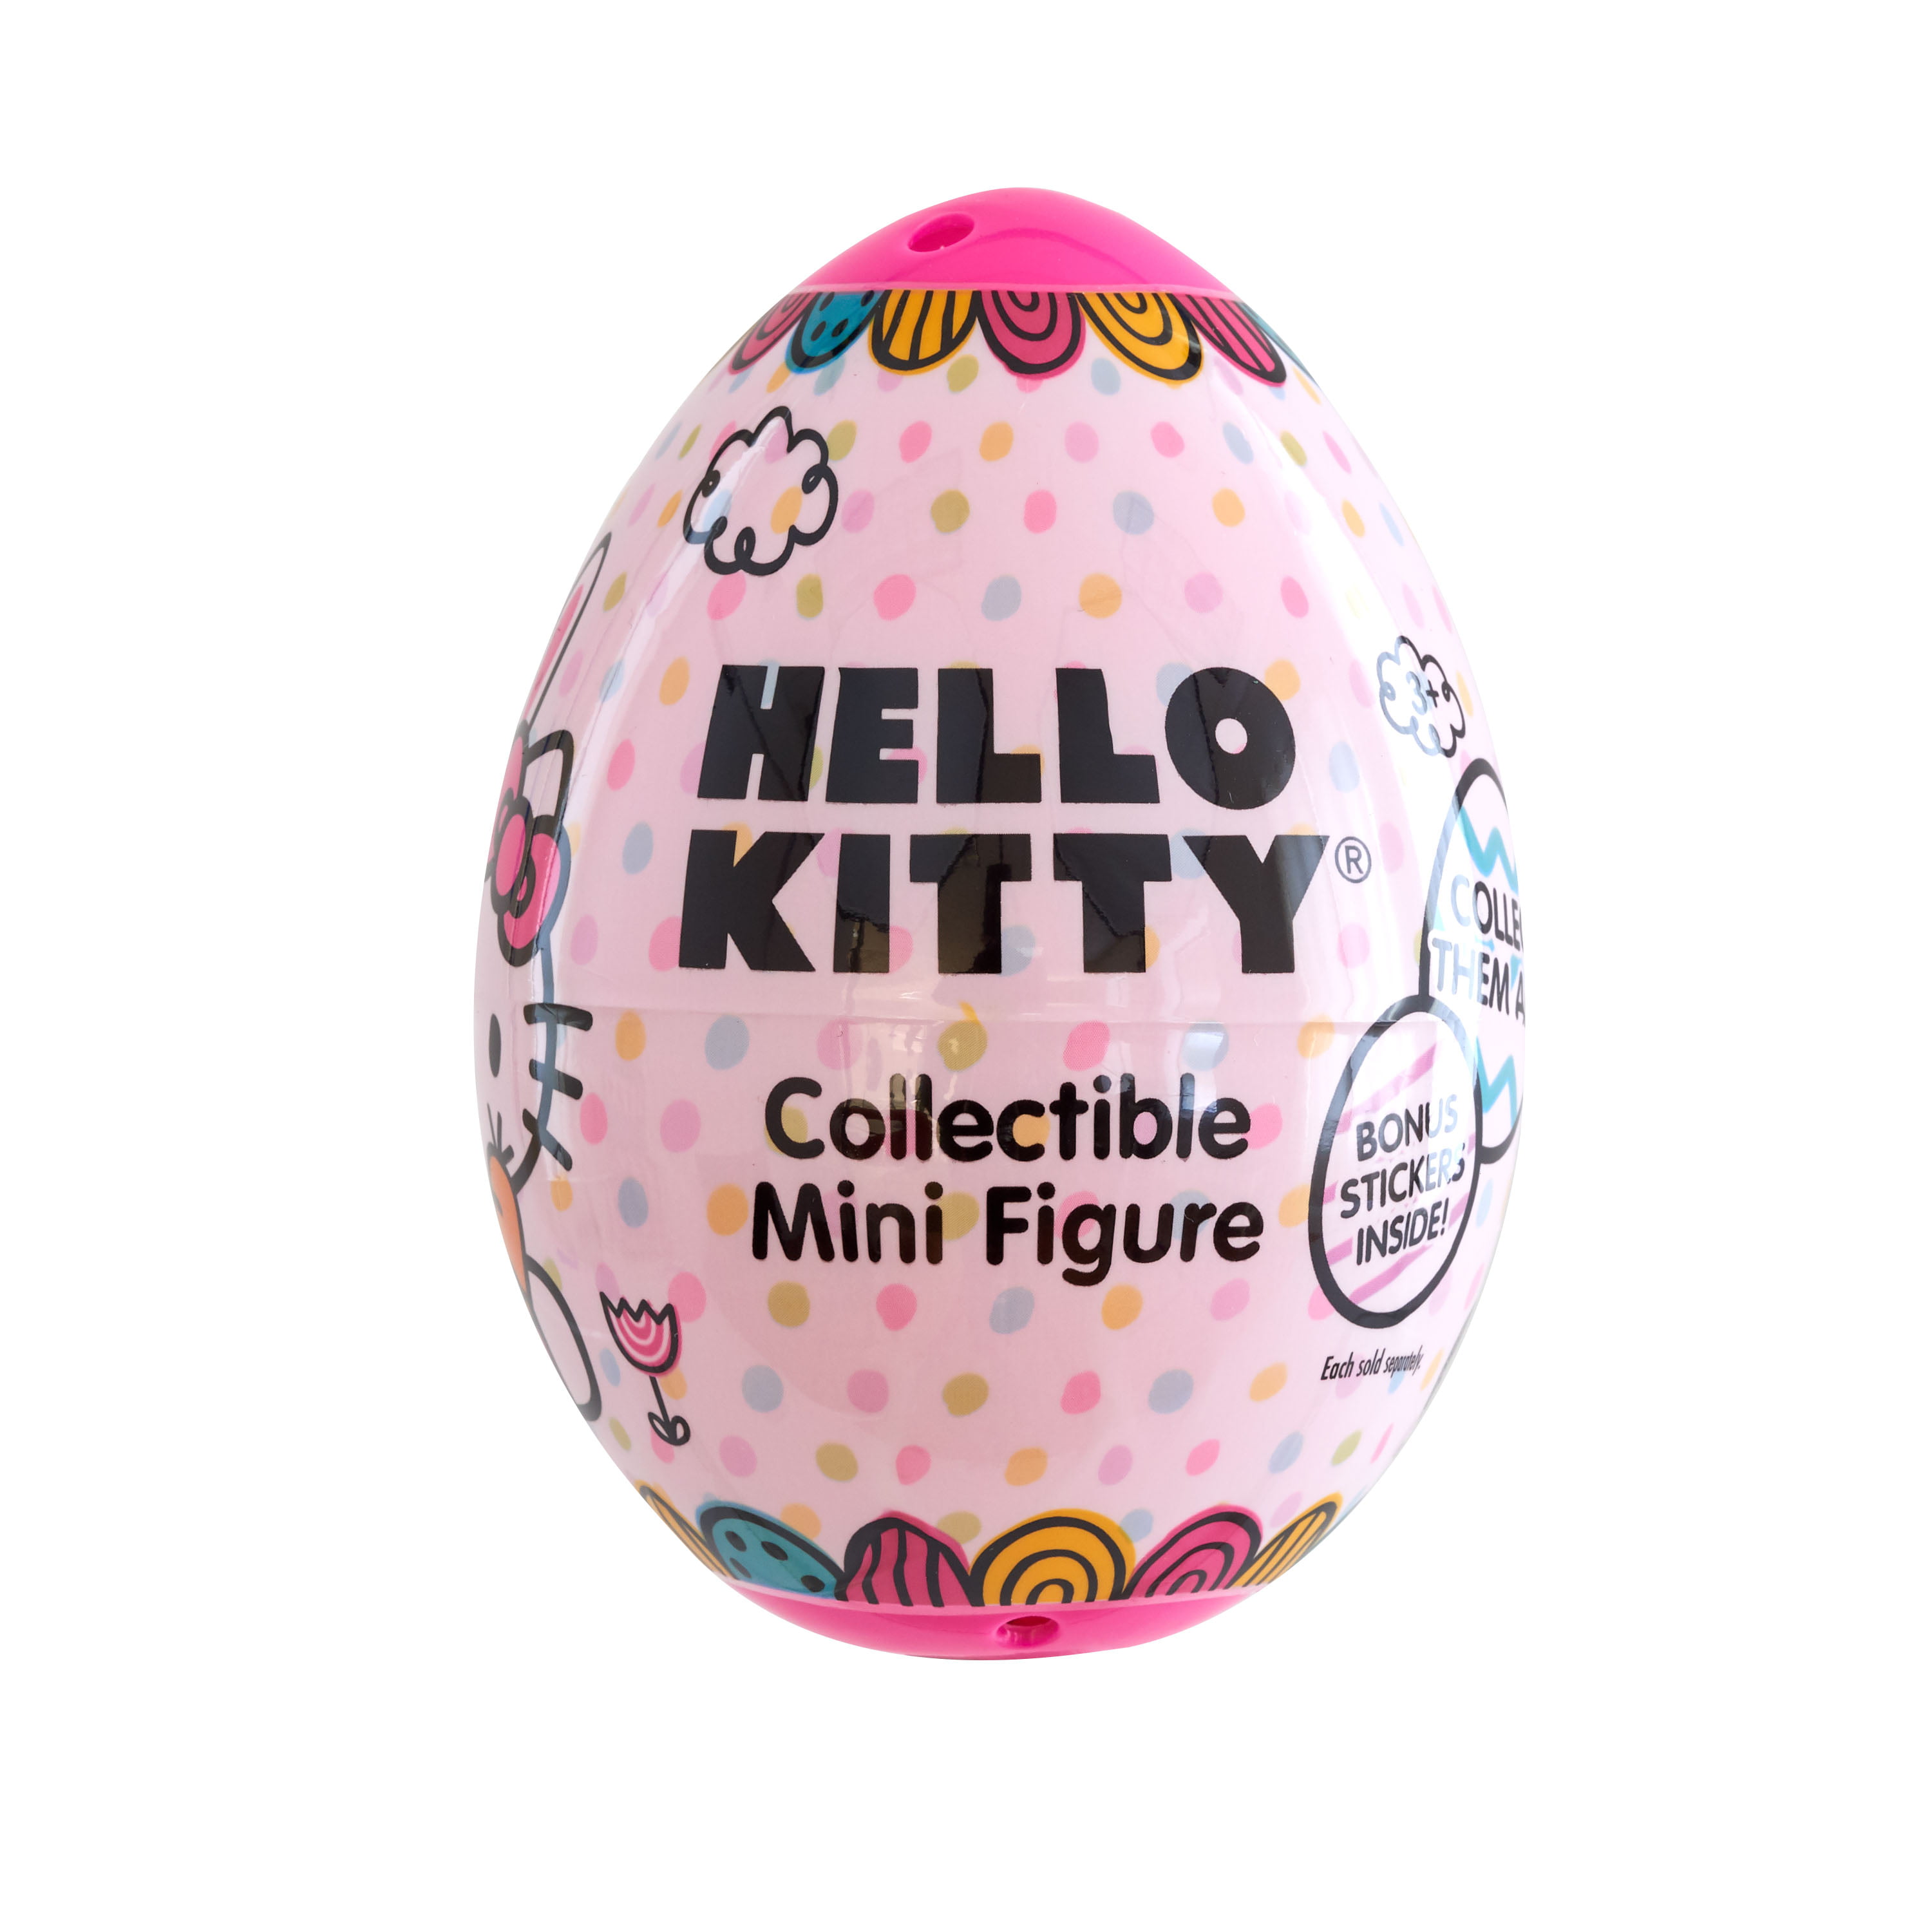 NEW Hello Kitty Easter Egg Decorating Kit And Stickers FREE WORLDWIDE SHIPPING 